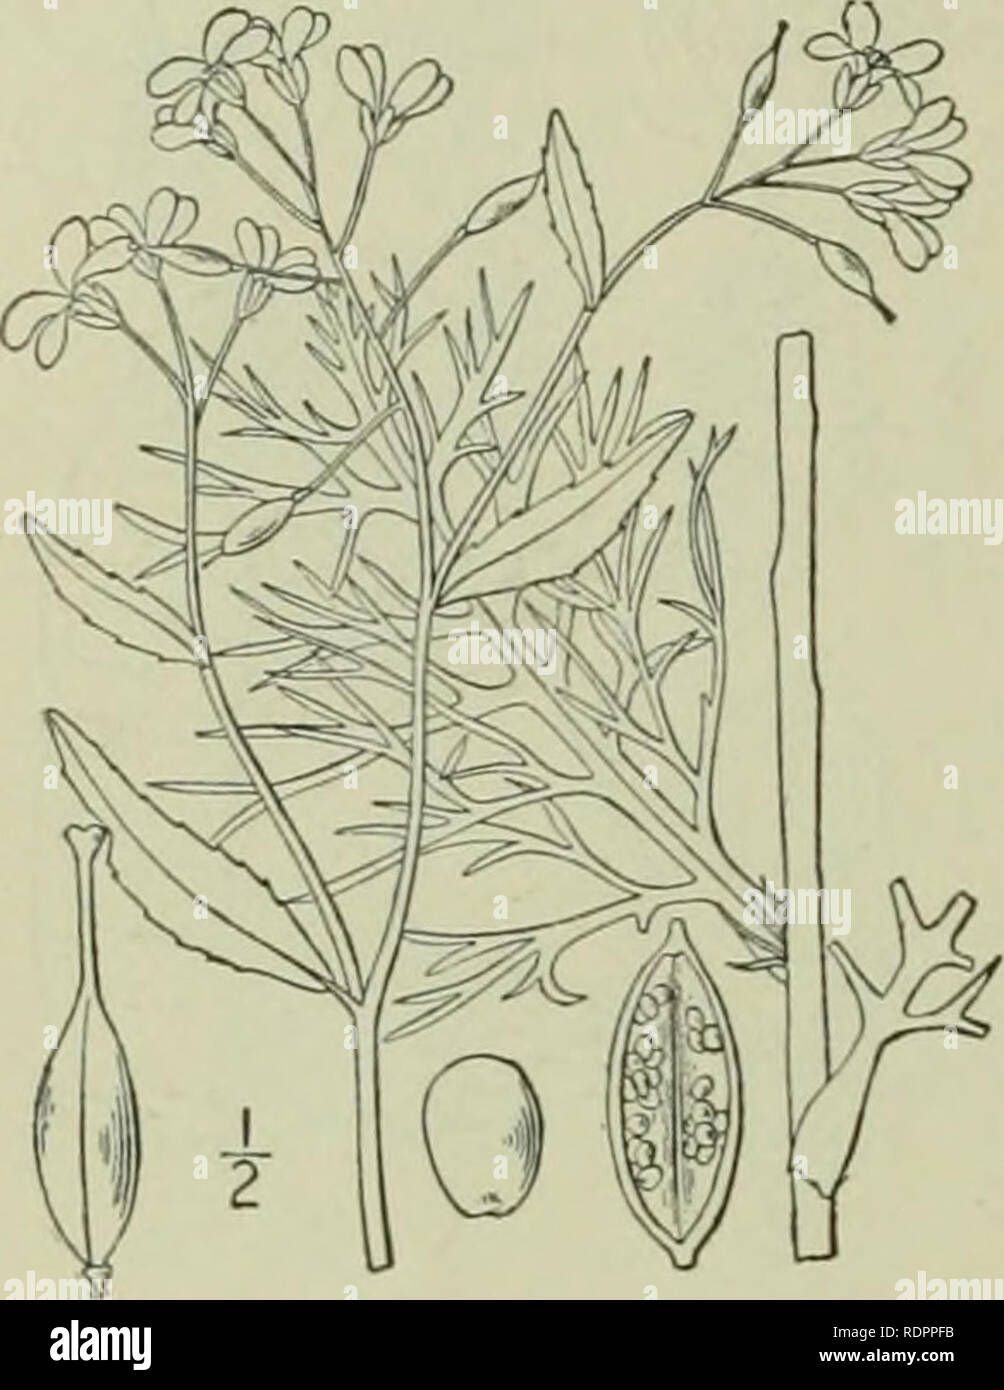 . An illustrated flora of the northern United States, Canada and the British possessions : from Newfoundland to the parallel of the southern boundary of Virginia and from the Atlantic Ocean westward to the 102nd meridian. Botany. CRUCIFERAE. I, Neobeckia aquatica (Eatonj Britton. Lake Water-cress. River-cress. Fig. 2036. Cochlearia aquatica Eaton, Man. Ed. 5, 181. 1829. Nasturtium nalans var americanum A. Gray, Ann. Lye. N. Y. 3:223. 1836. Nasturtium lacustre A. Gray, Gen. lU. i : 132. 1848. Rorifa americana Britton, Mem. Torn Club 5: 169. 1894. Neobeckia aquatica Greene, Pittonia 3: 95. 1896. Stock Photo